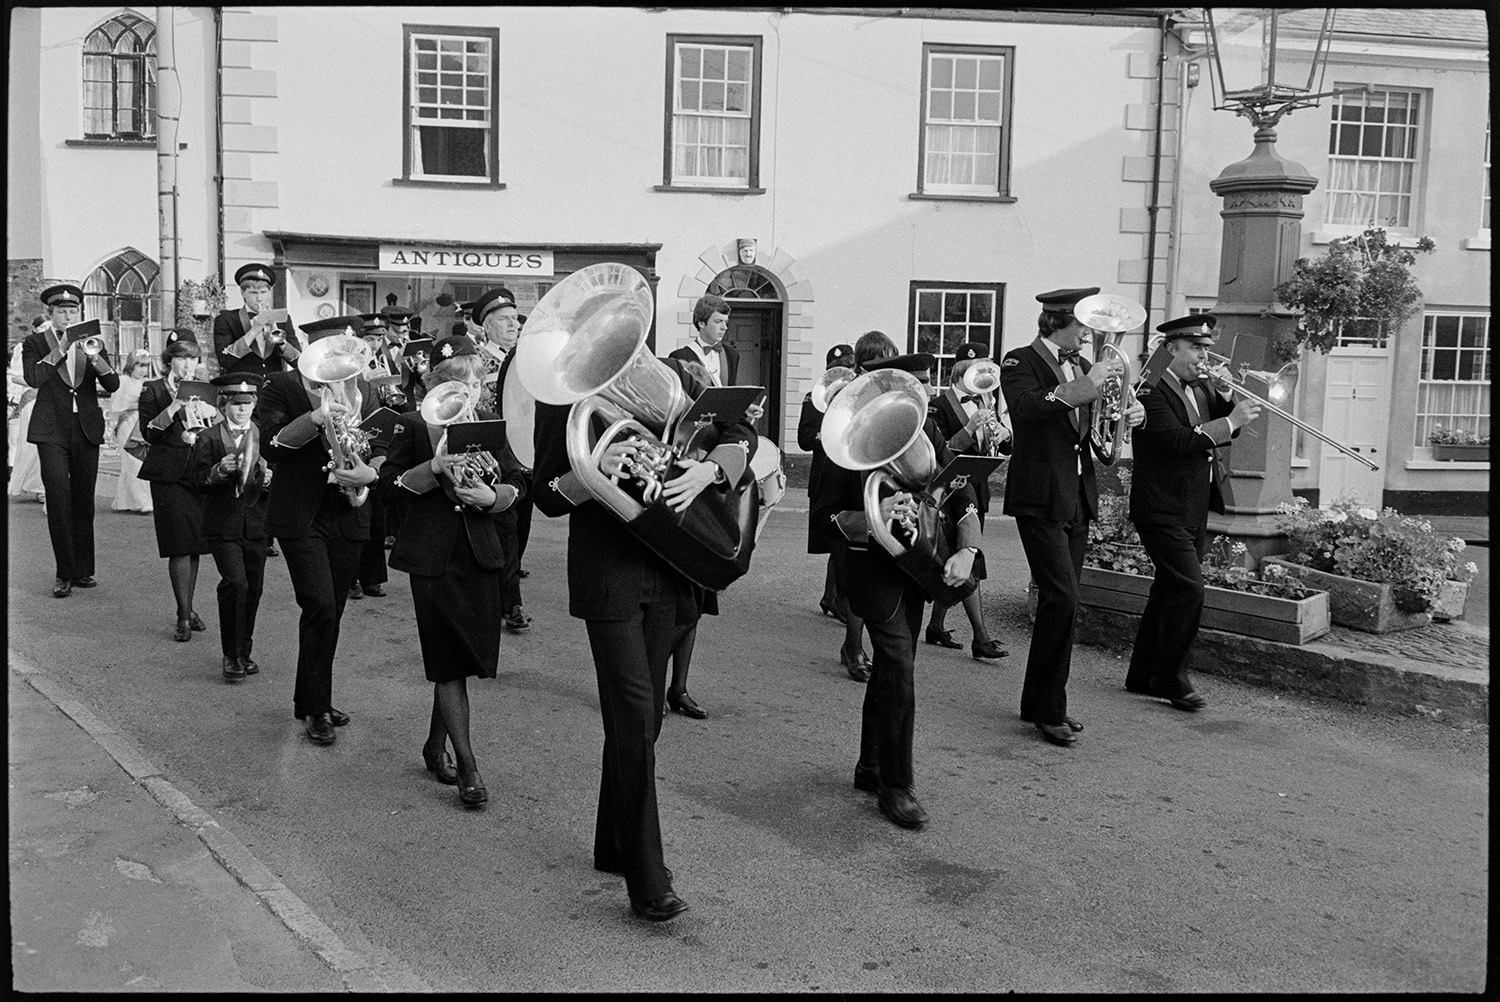 Procession with Fair Queen and band, speech from window, raising the glove, spectators. 
[A brass band marching along a street in Chulmleigh at Chulmleigh Fair. They are passing an Antiques Shop window and a lamp decorated with flowers in planters.]